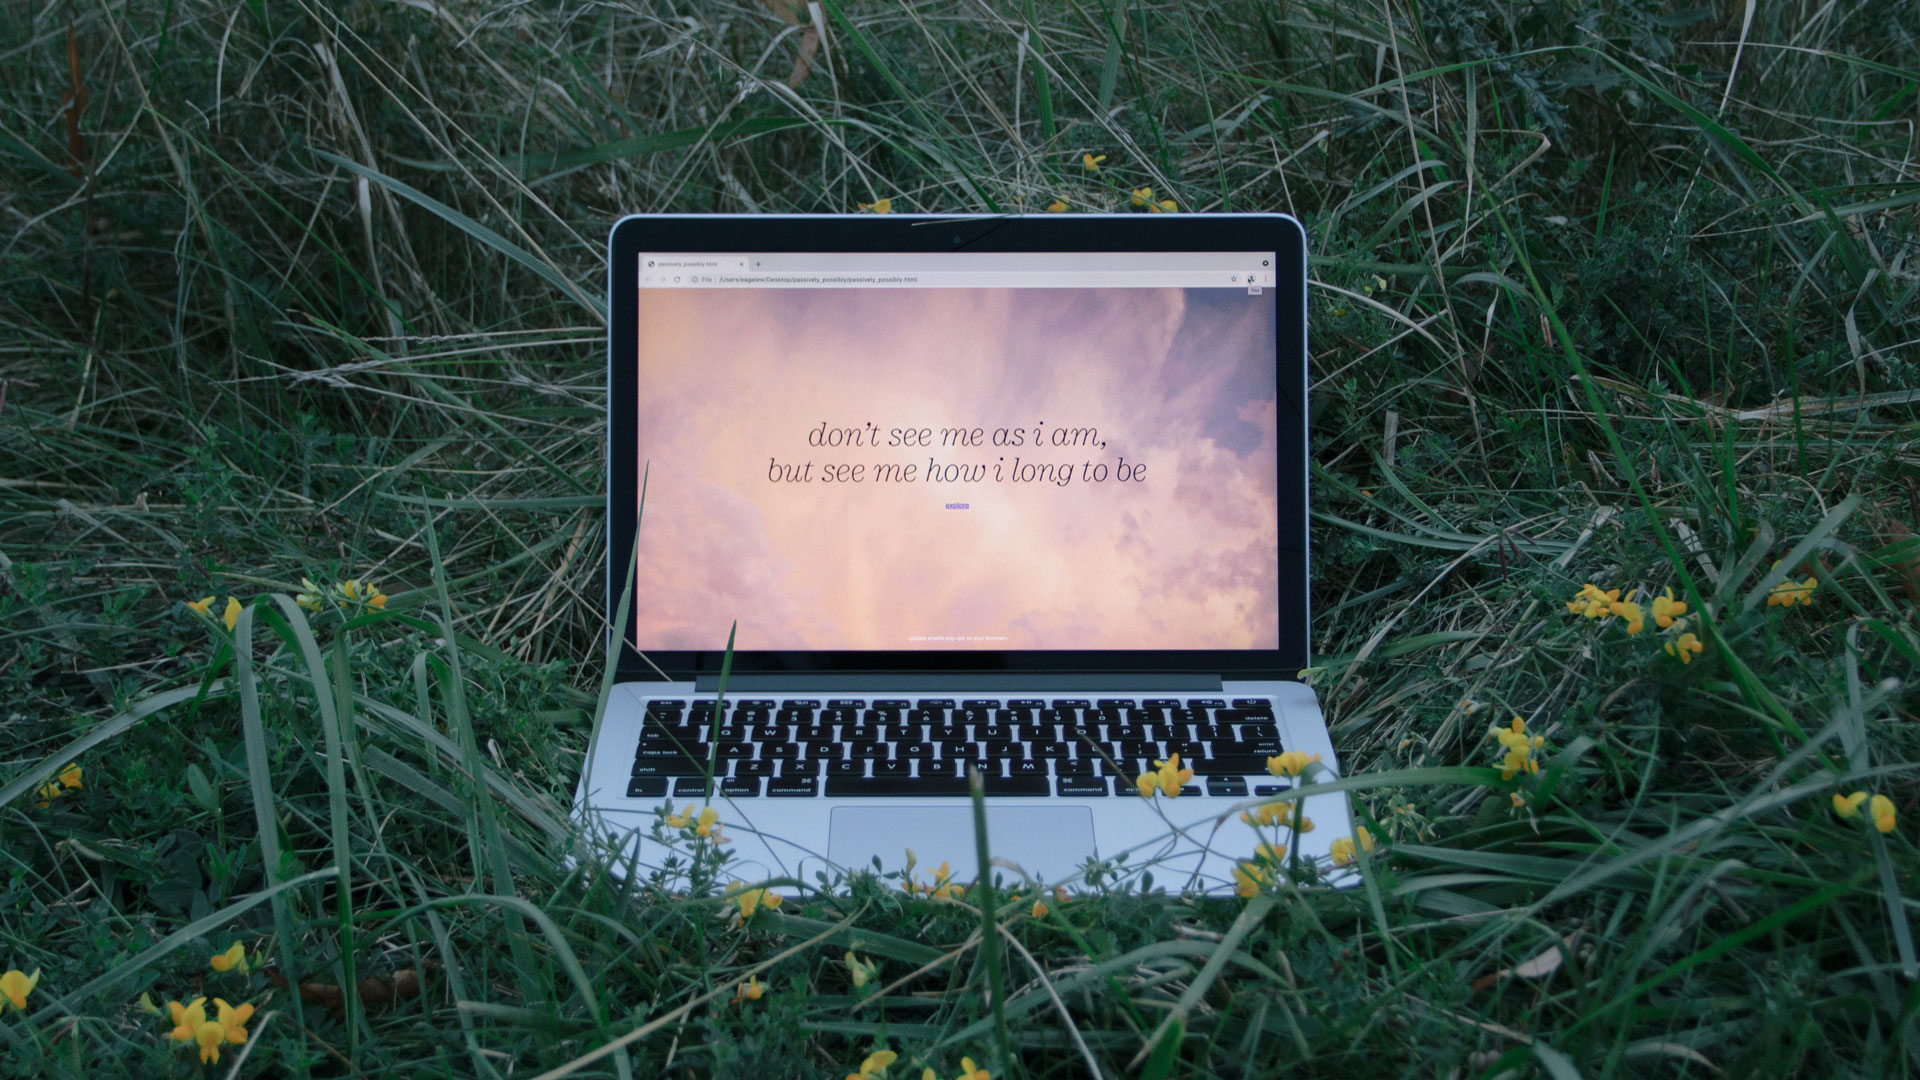 Laptop photographed in a grassy field. The screen reads: don't see me as i am, but see me how i long to be.